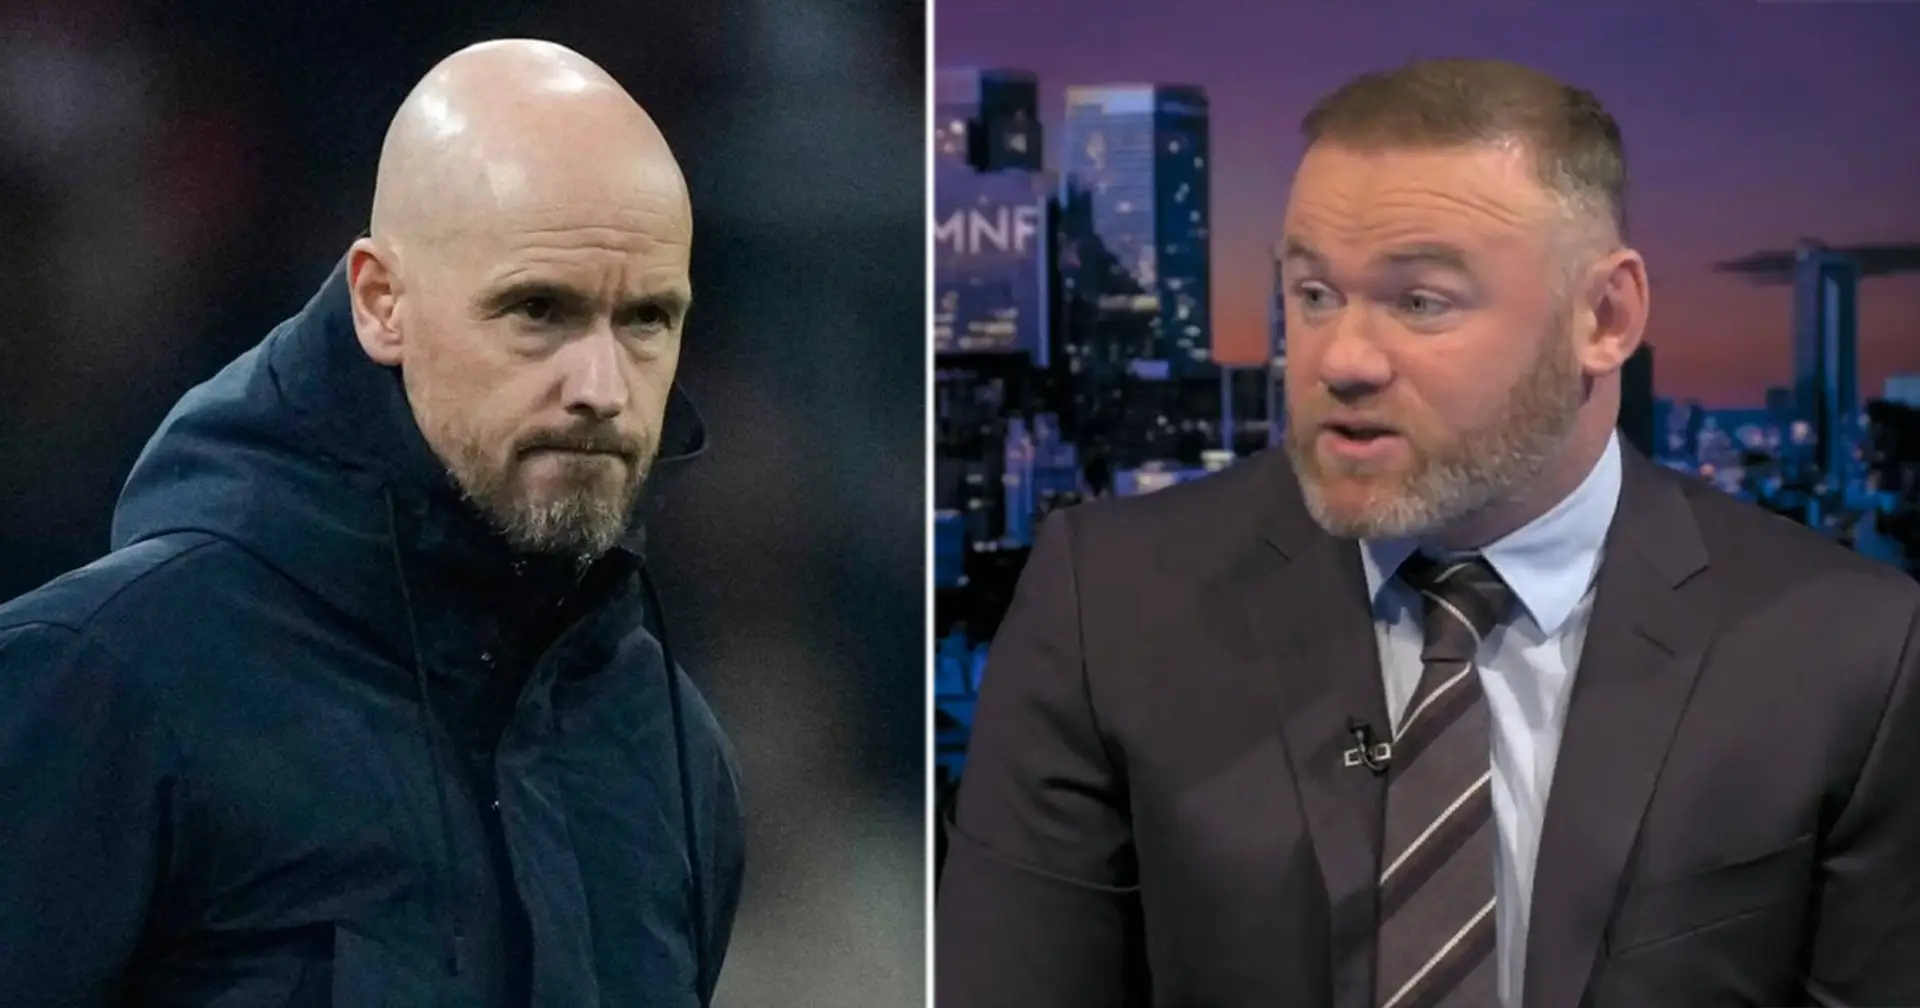 Wayne Rooney rejected chance to join Erik ten Hag's coaching staff, reason revealed - The Athletic